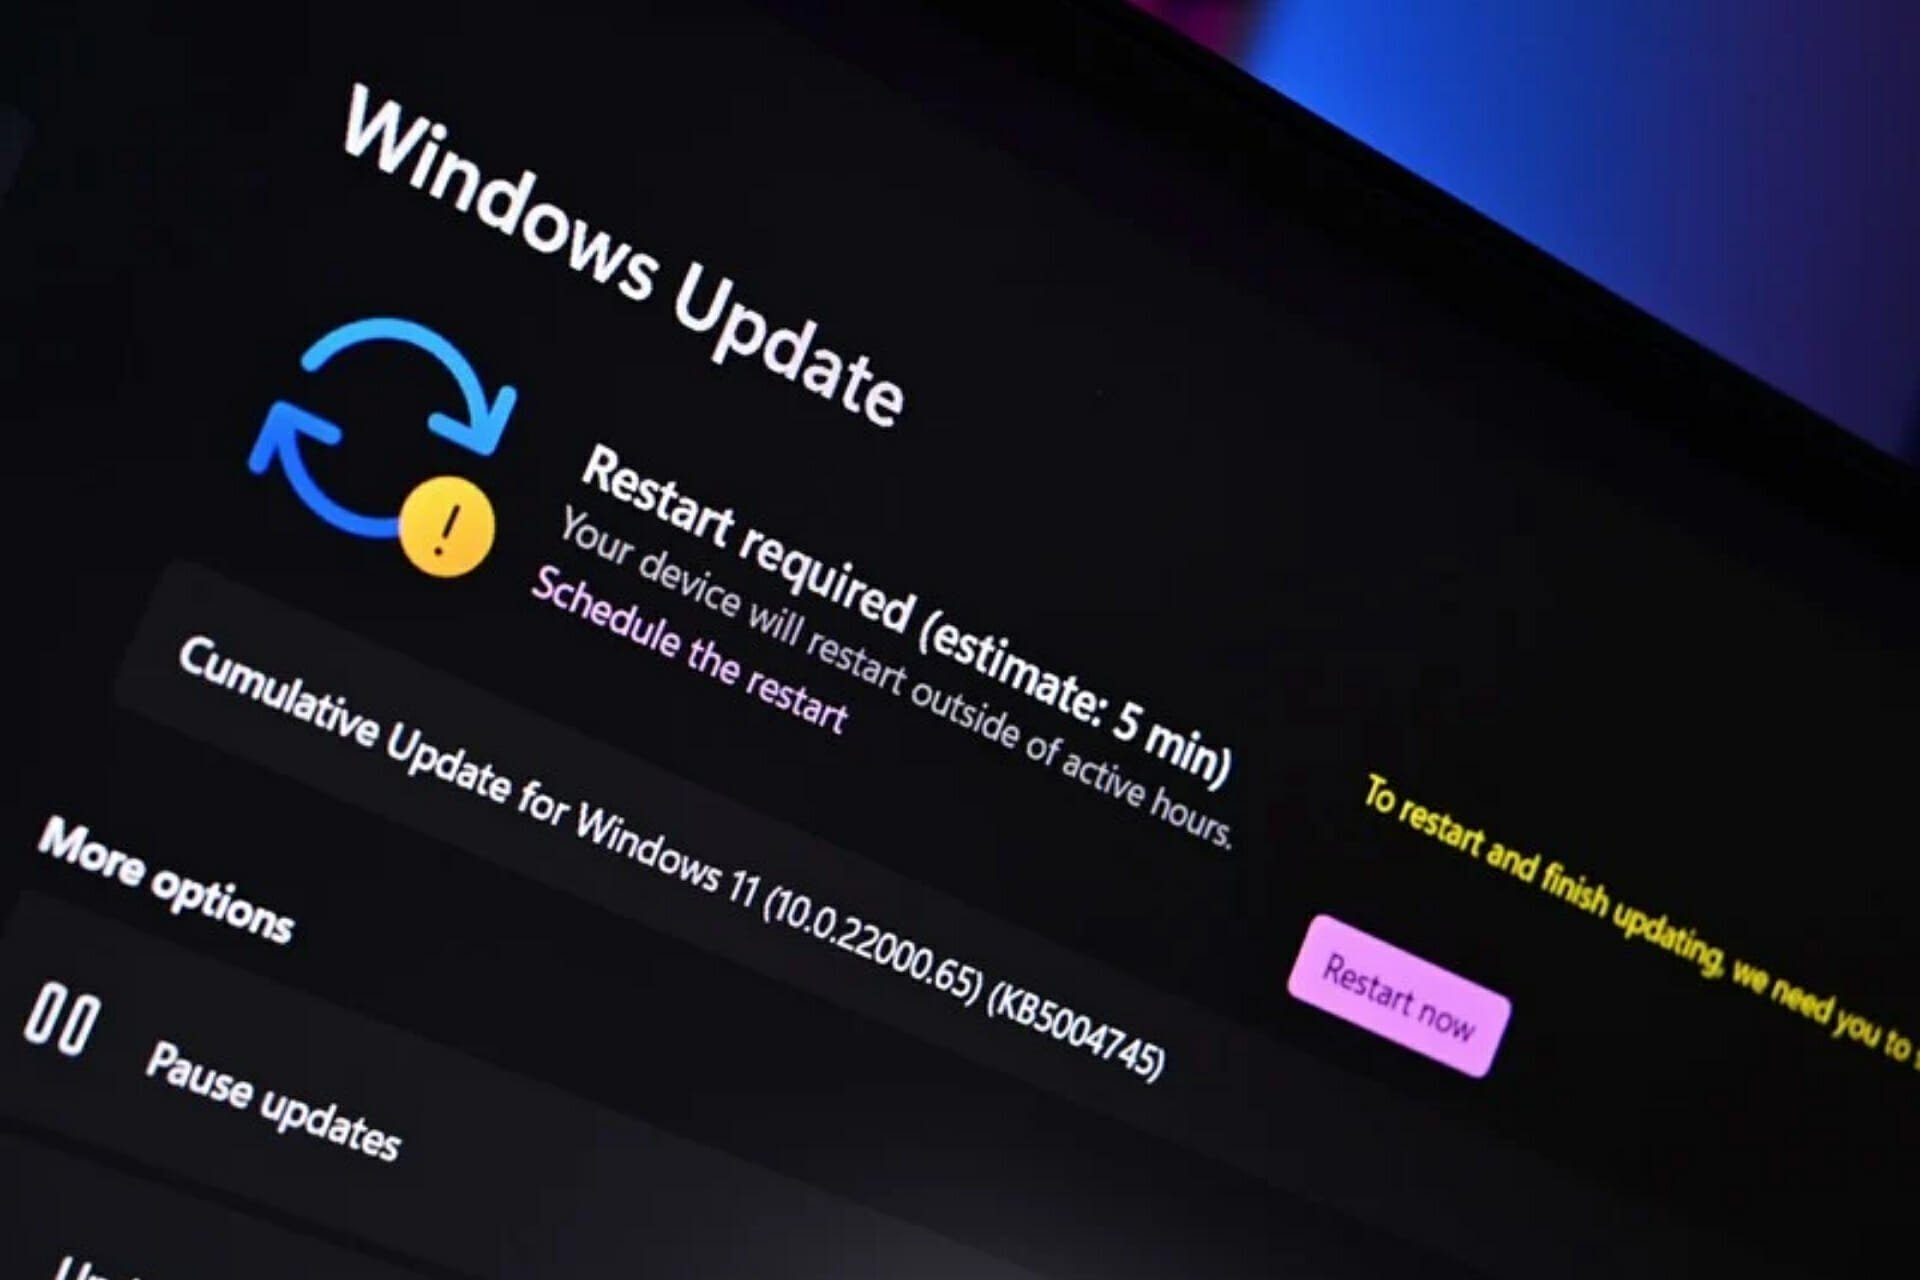 Windows Patch Tuesday September